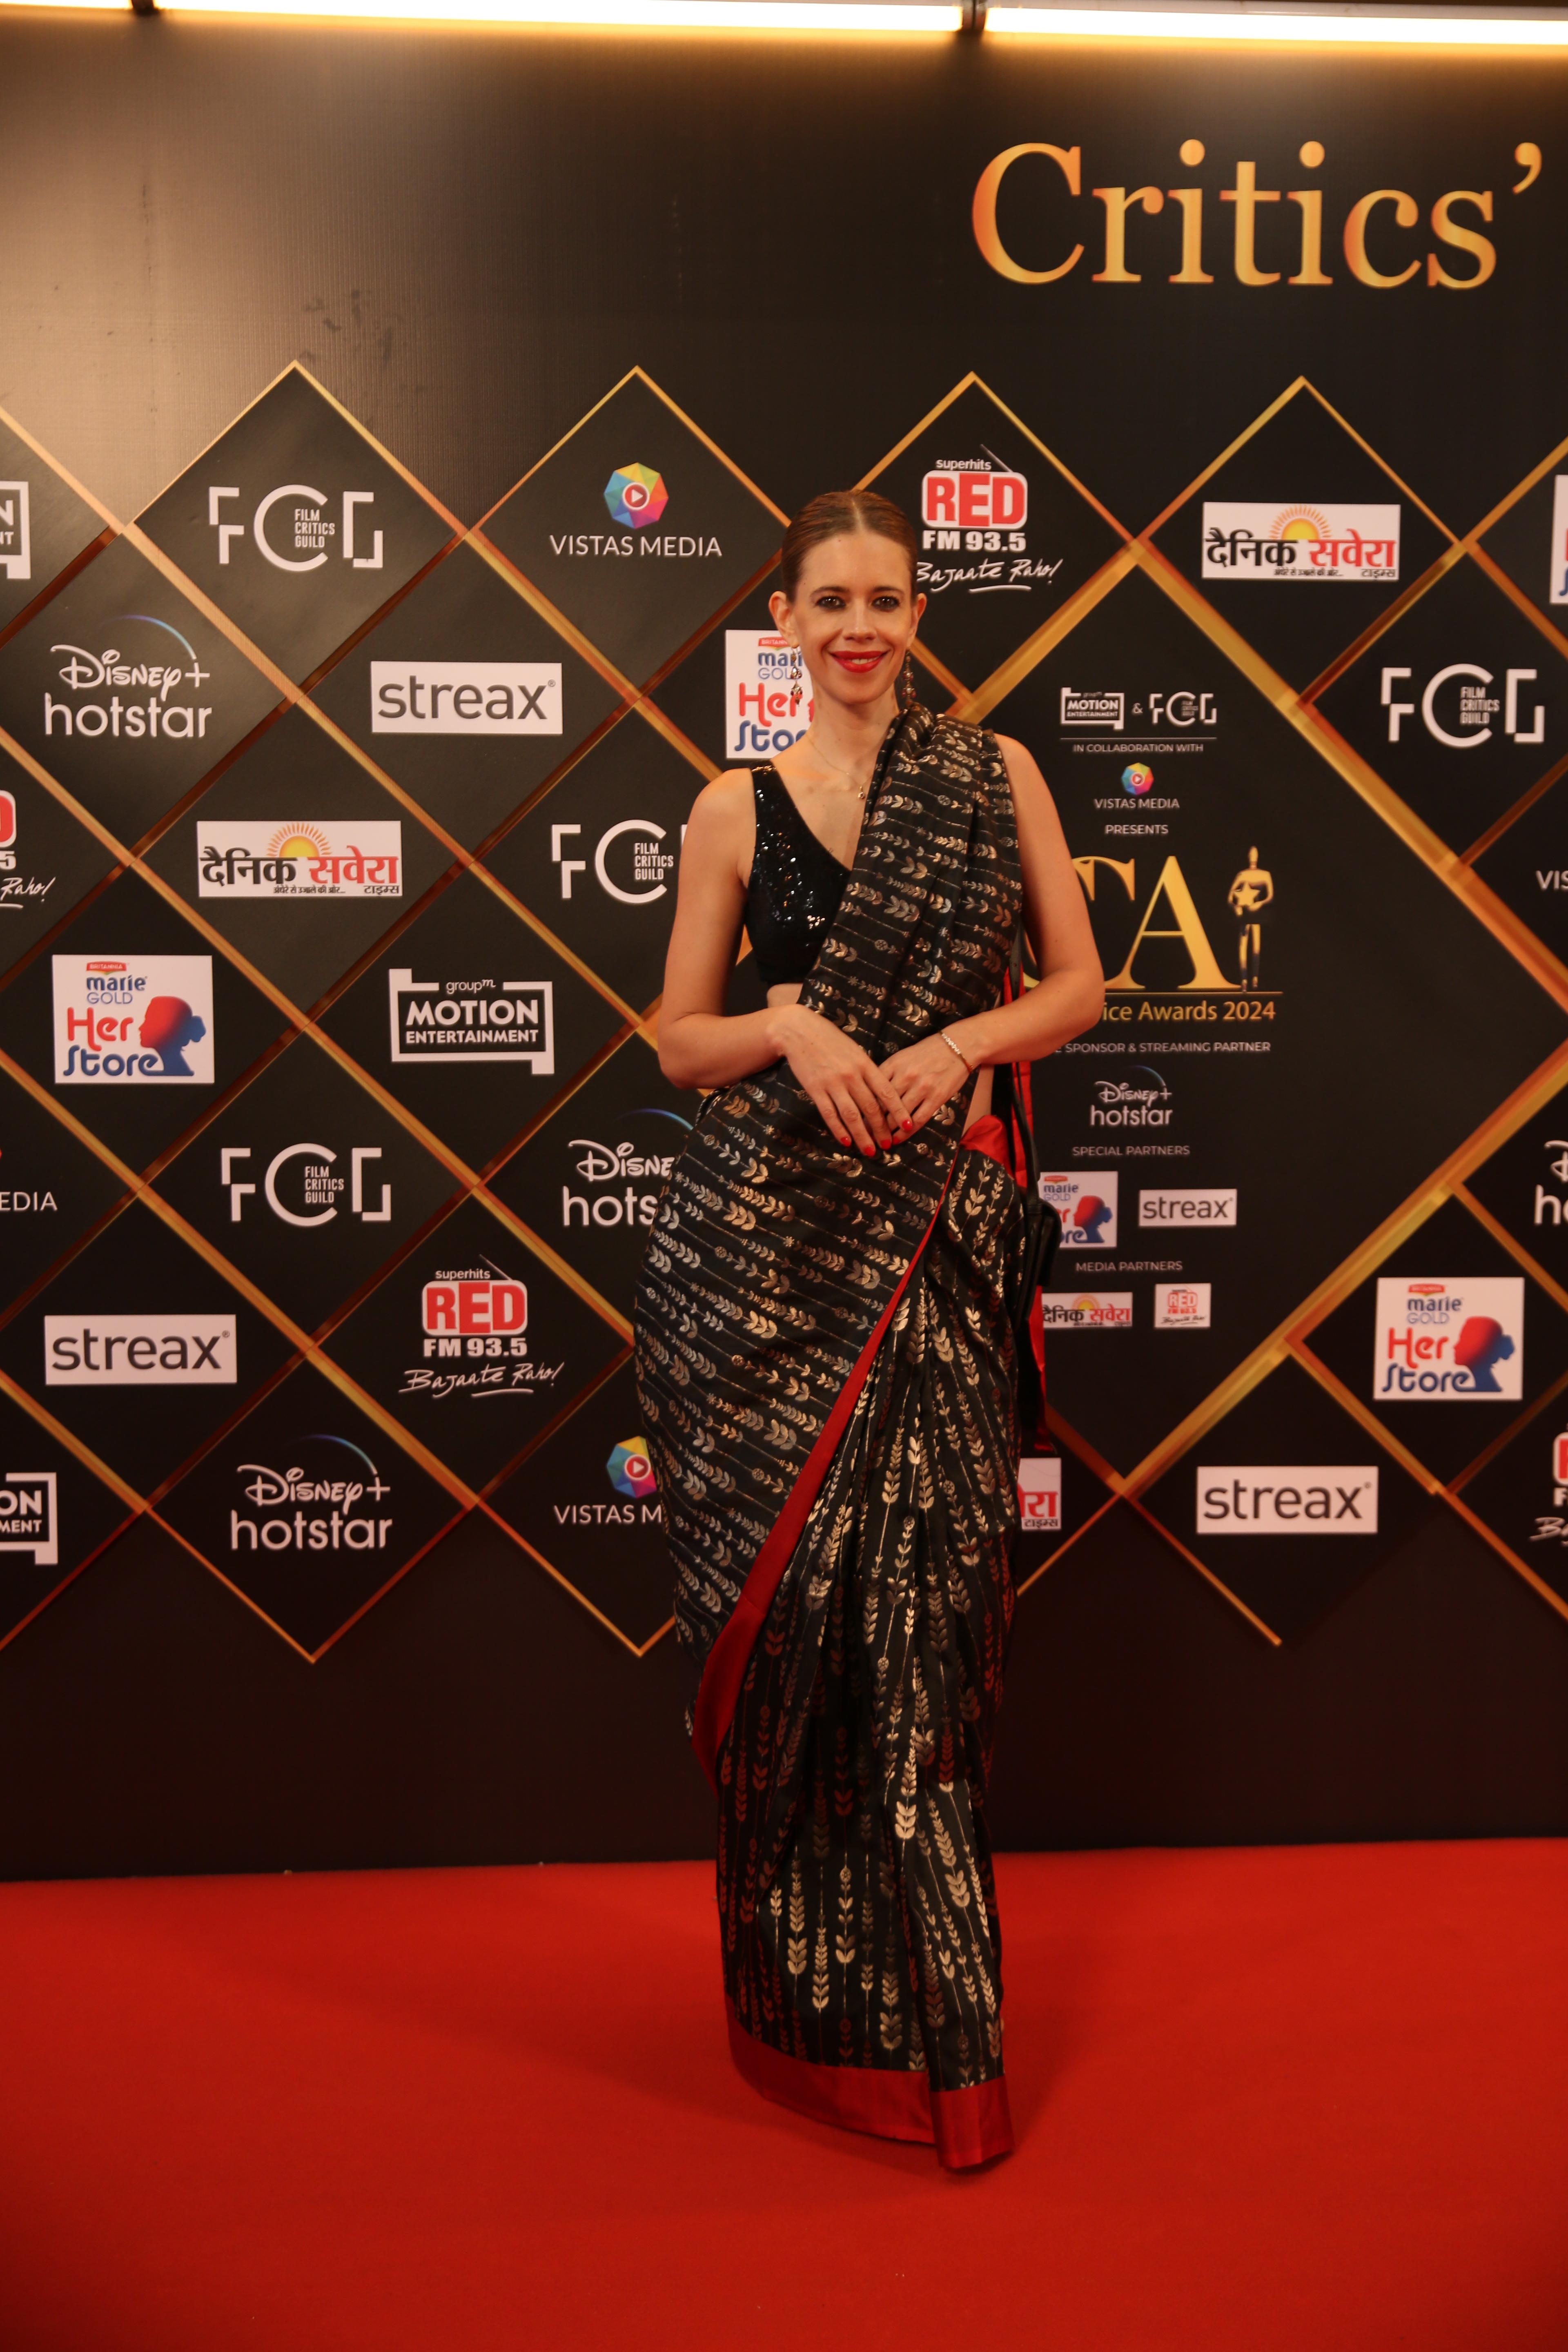 Kalki Koechliin made an appearance at the CCA red carpet. The actress was radiating elegance and glamour